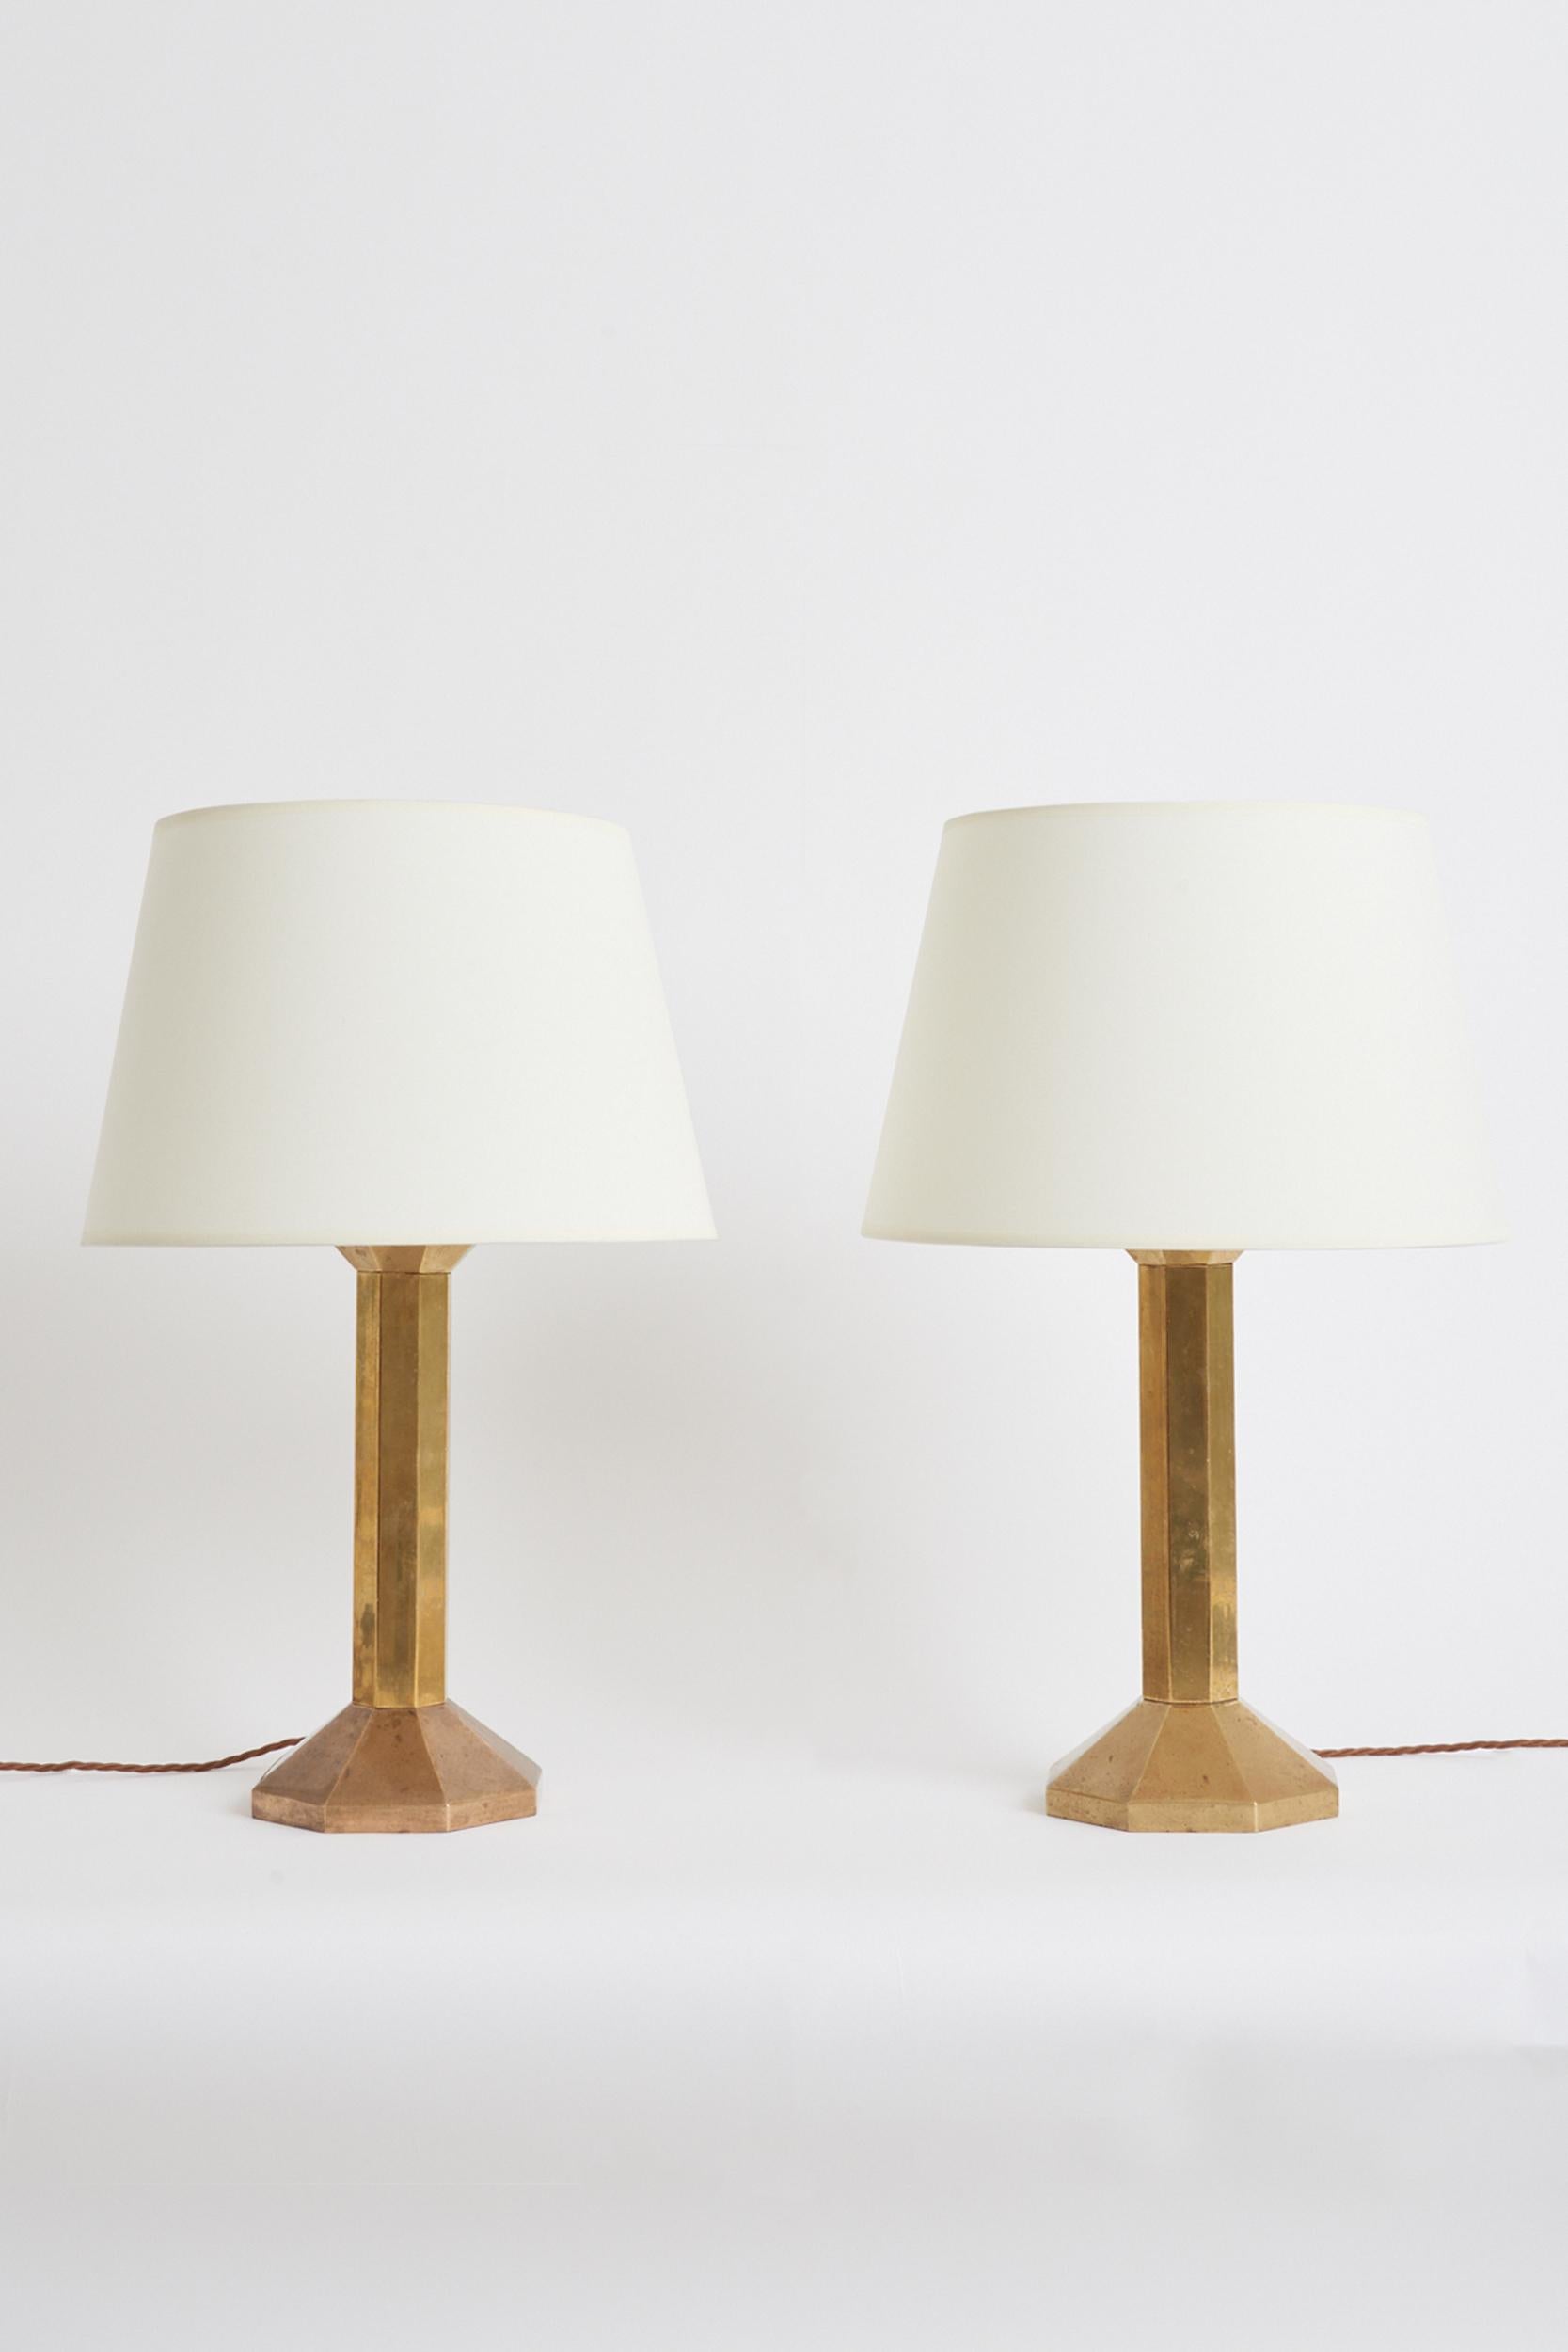 A pair of large faceted brass pricket sticks converted into table lamps.
France, 1940s.
With the shade: 61 cm high by 35.5 cm diameter
Lamp base only: 43 cm high by 18 cm diameter.